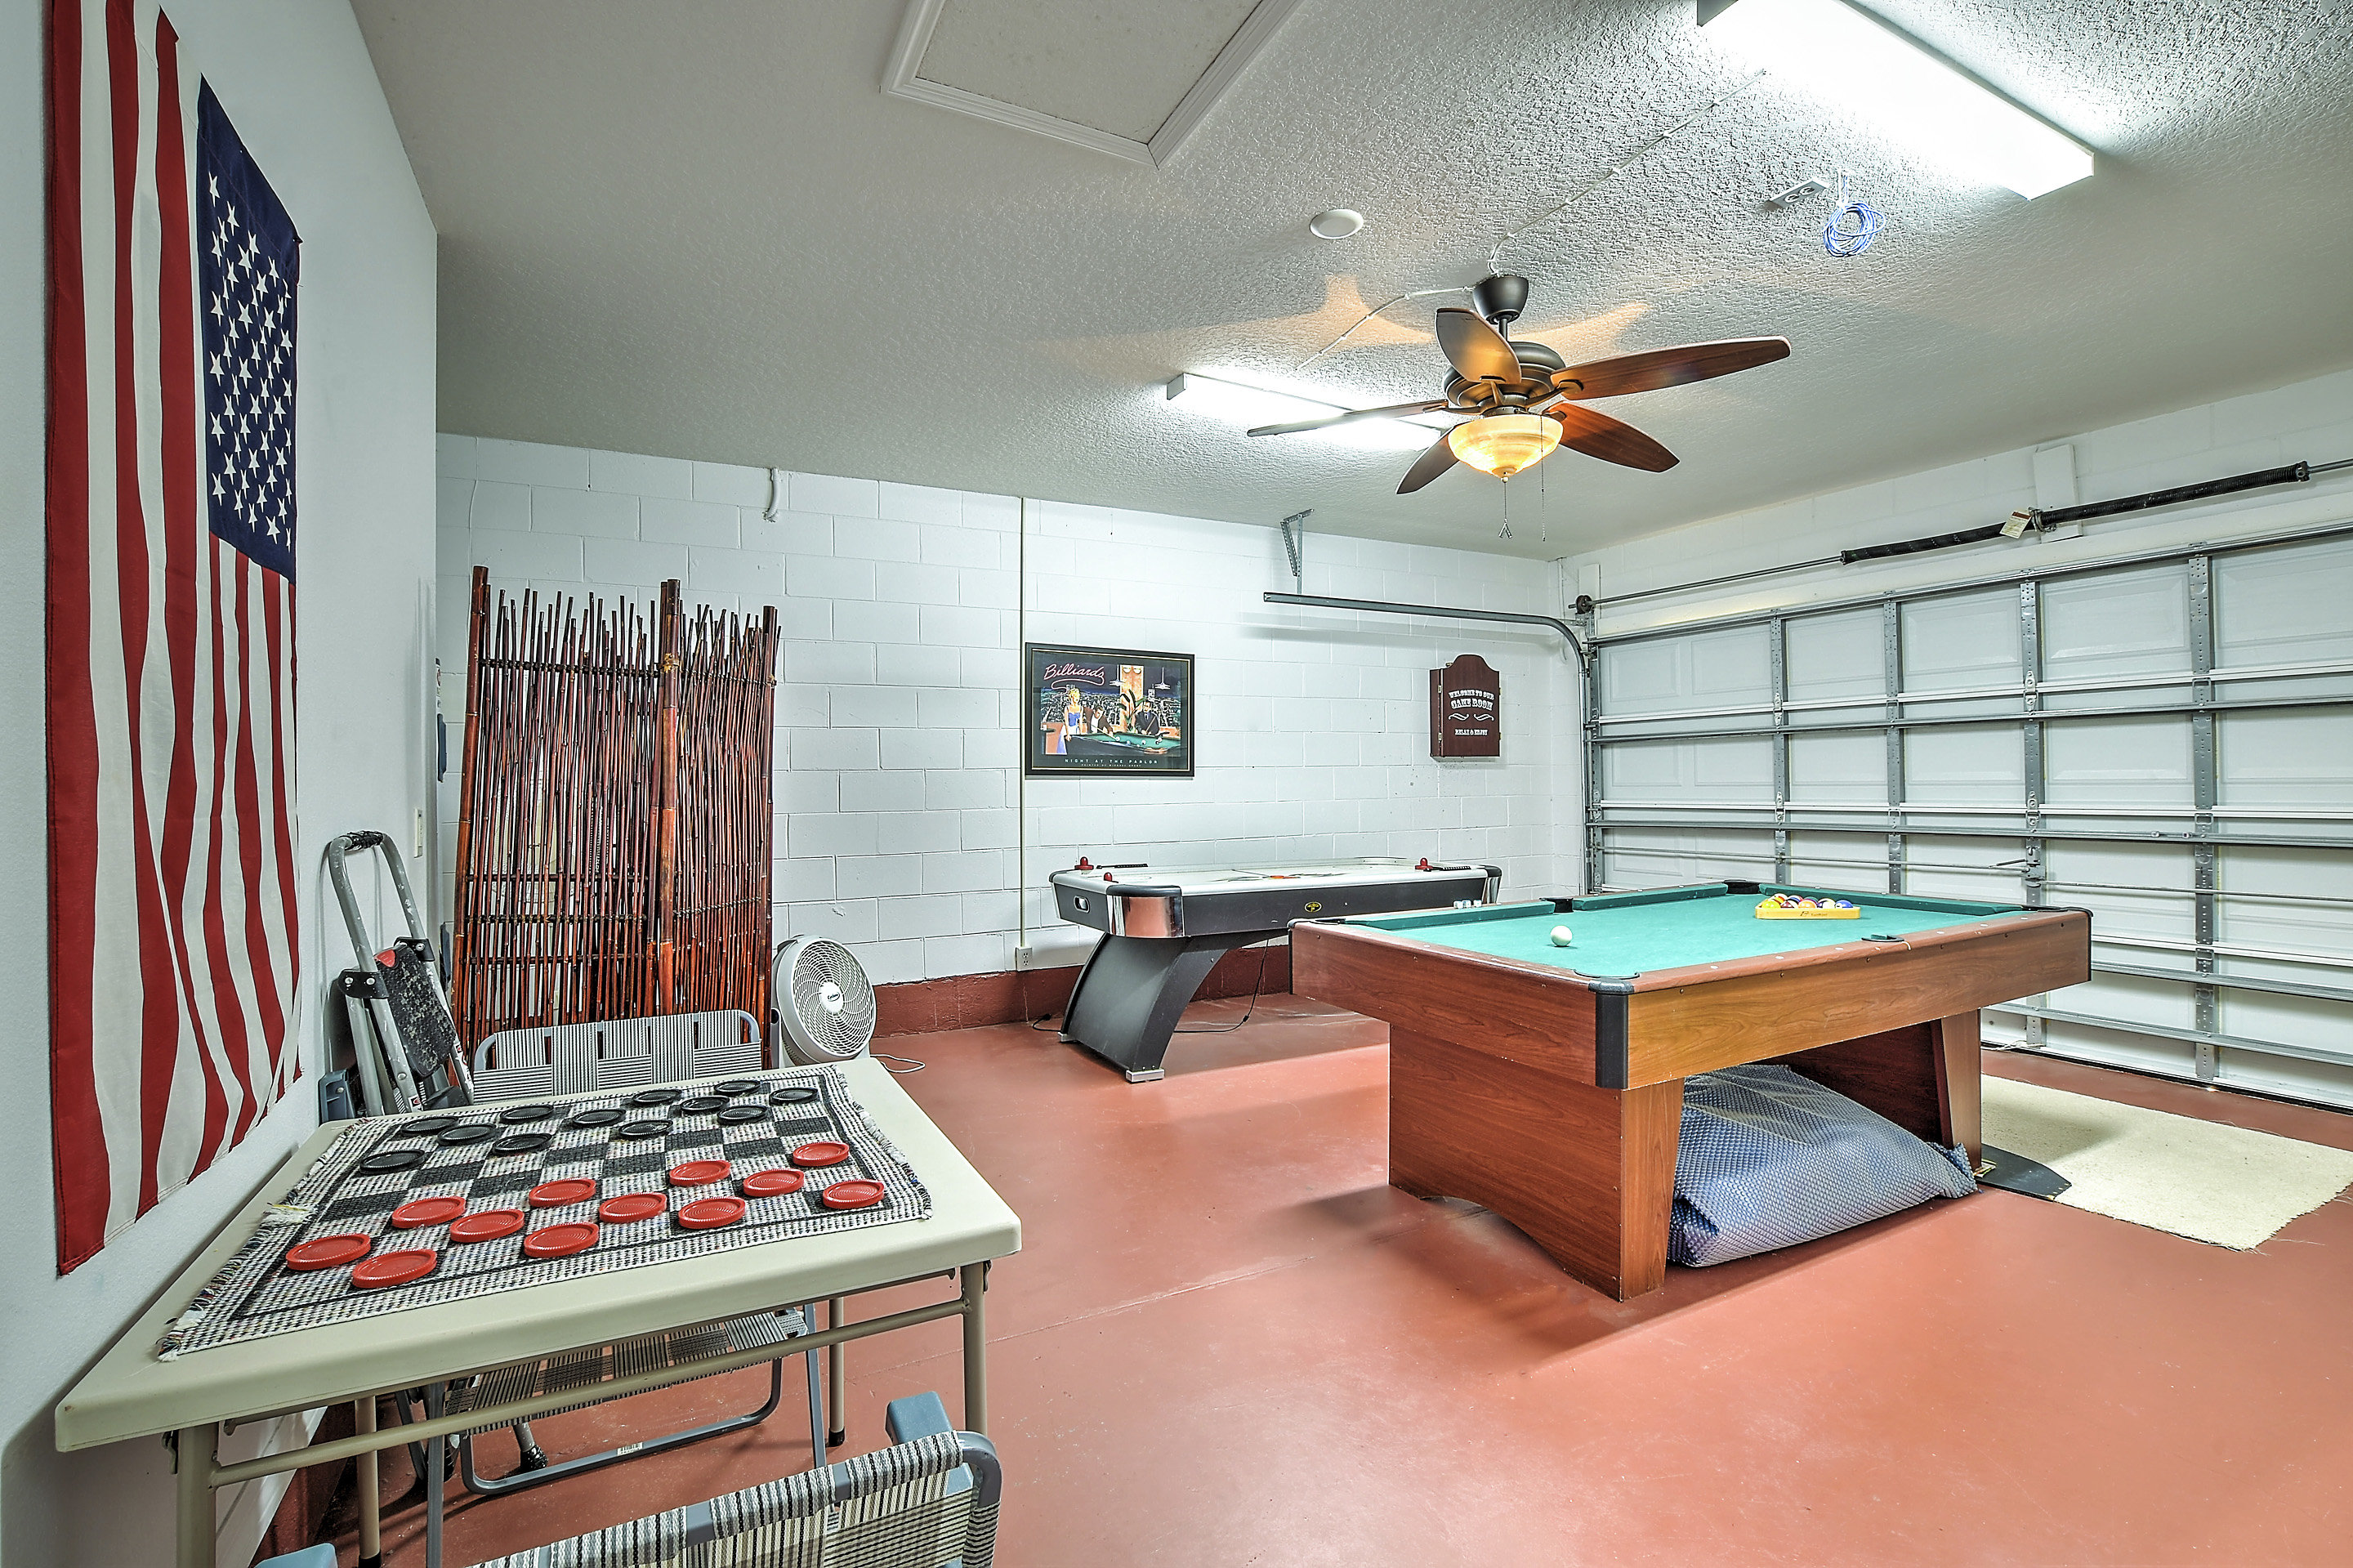 Home. Games room